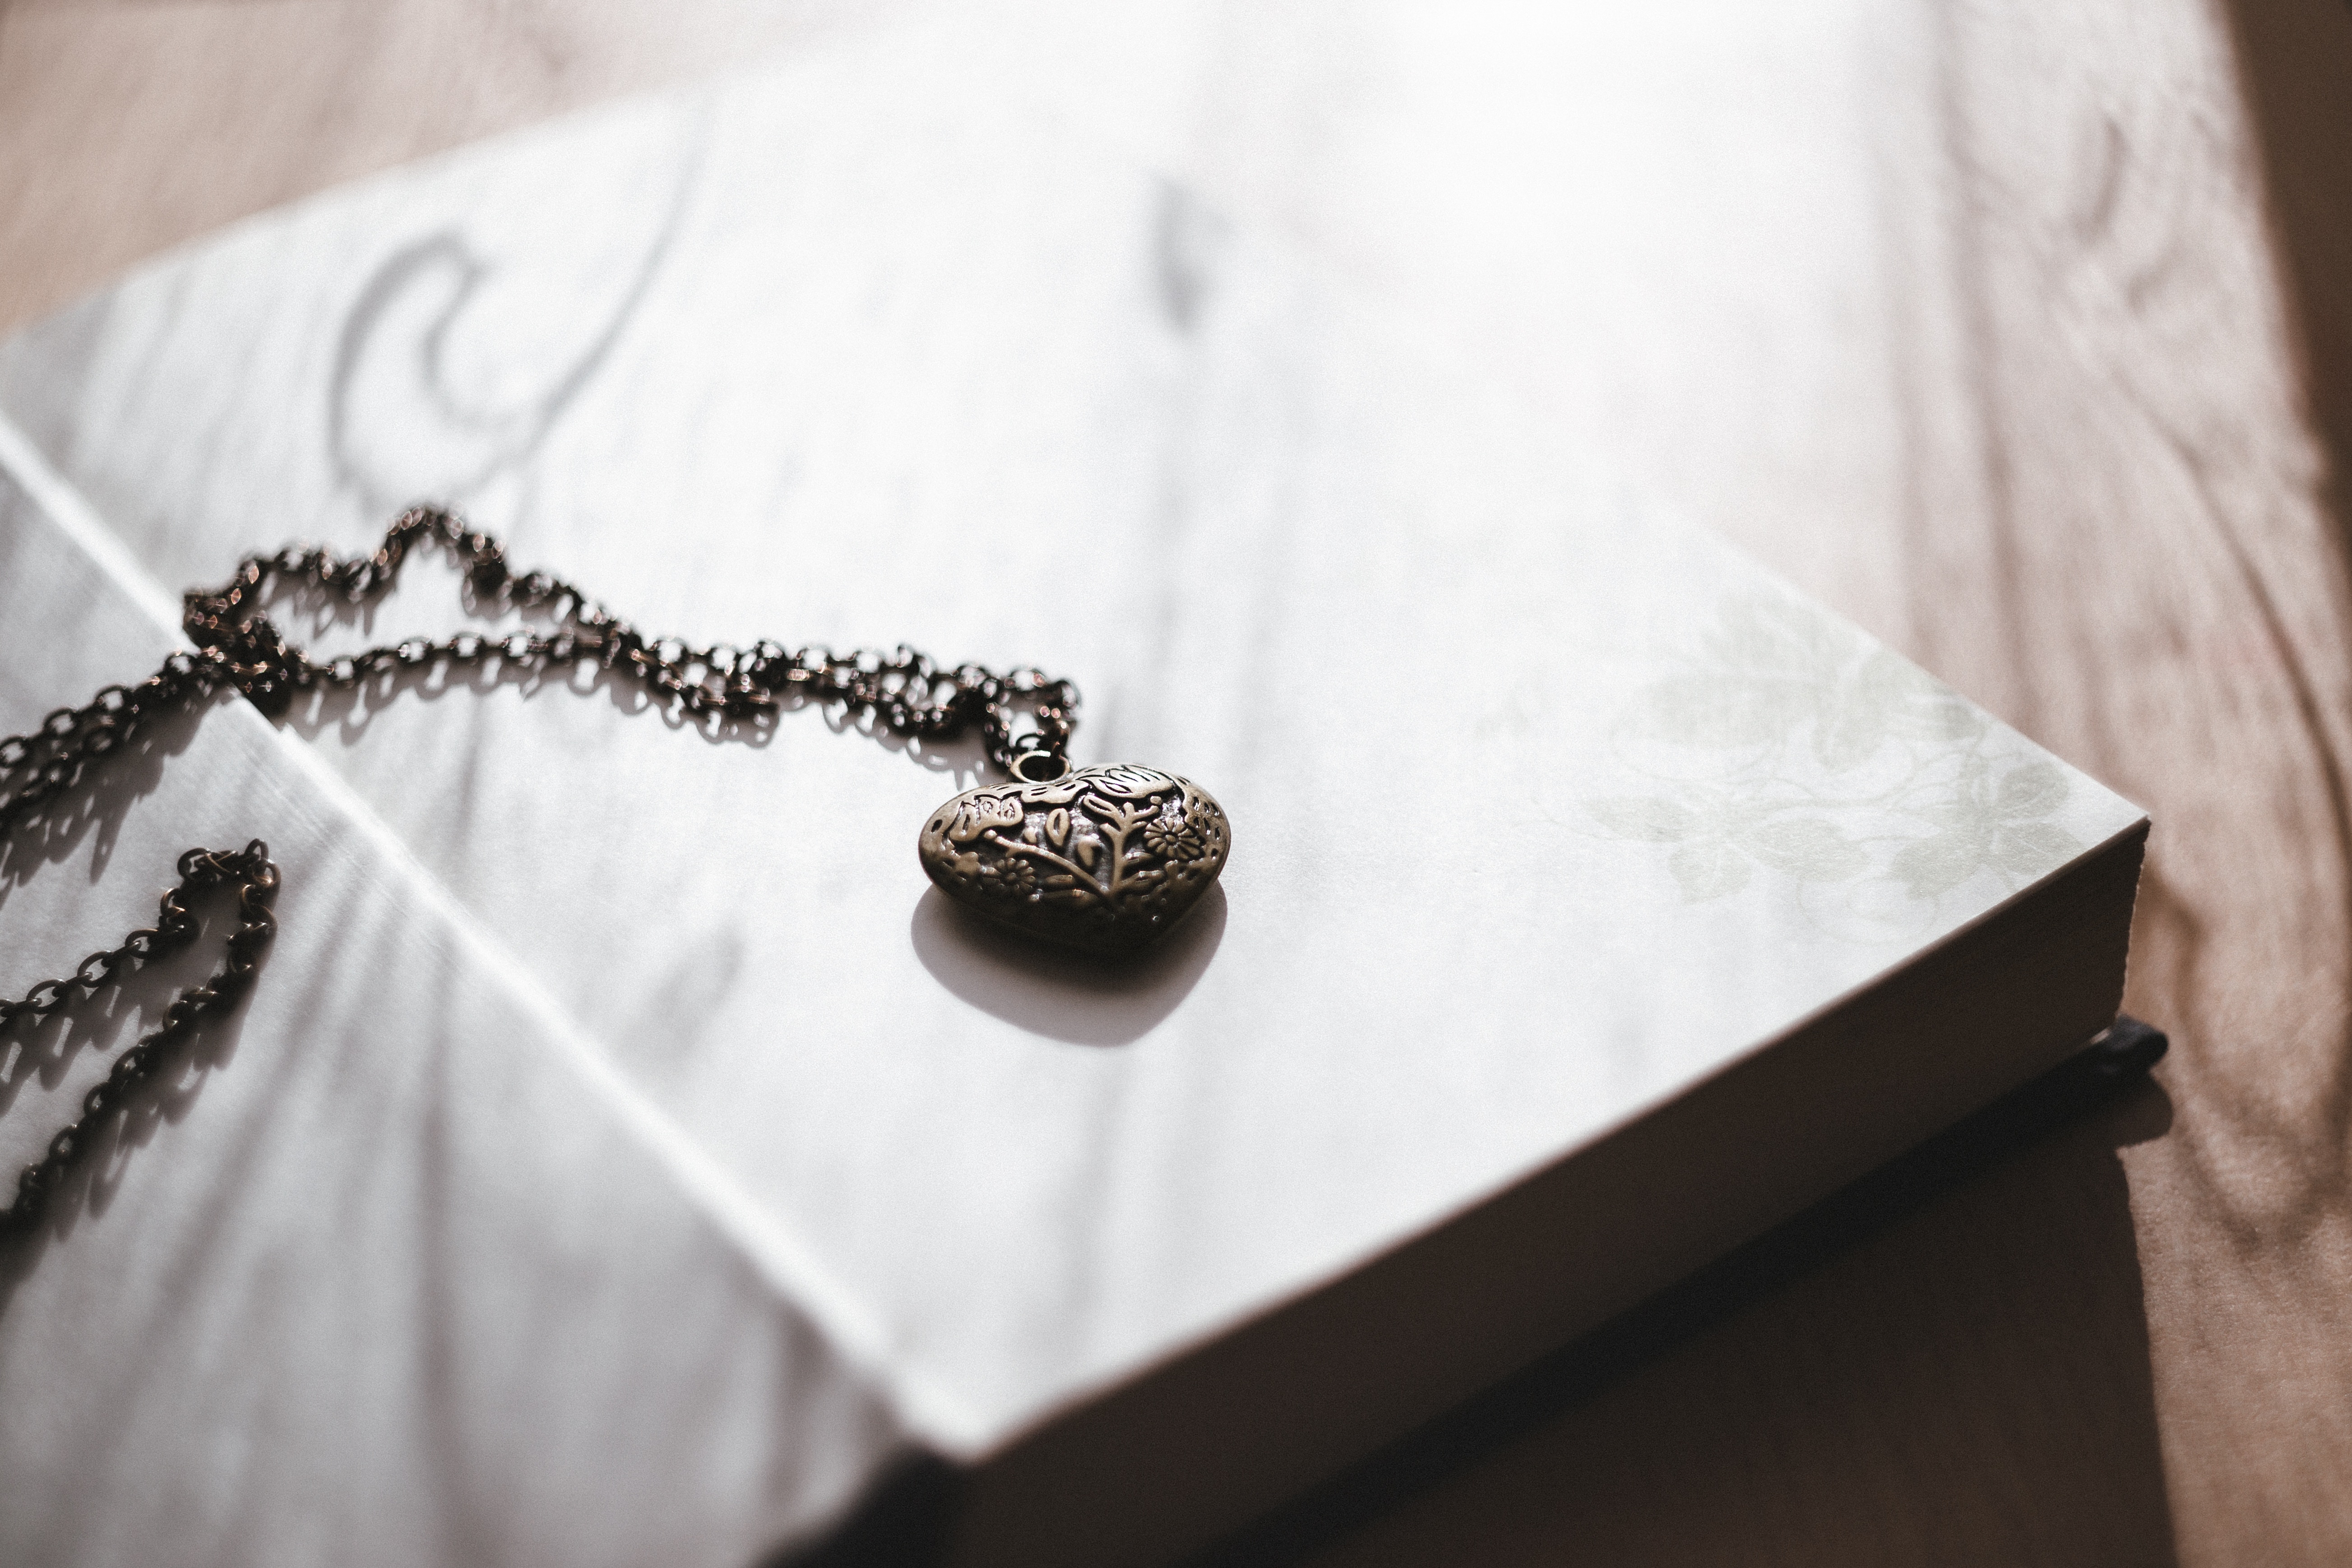 Image of a locket necklace on a book